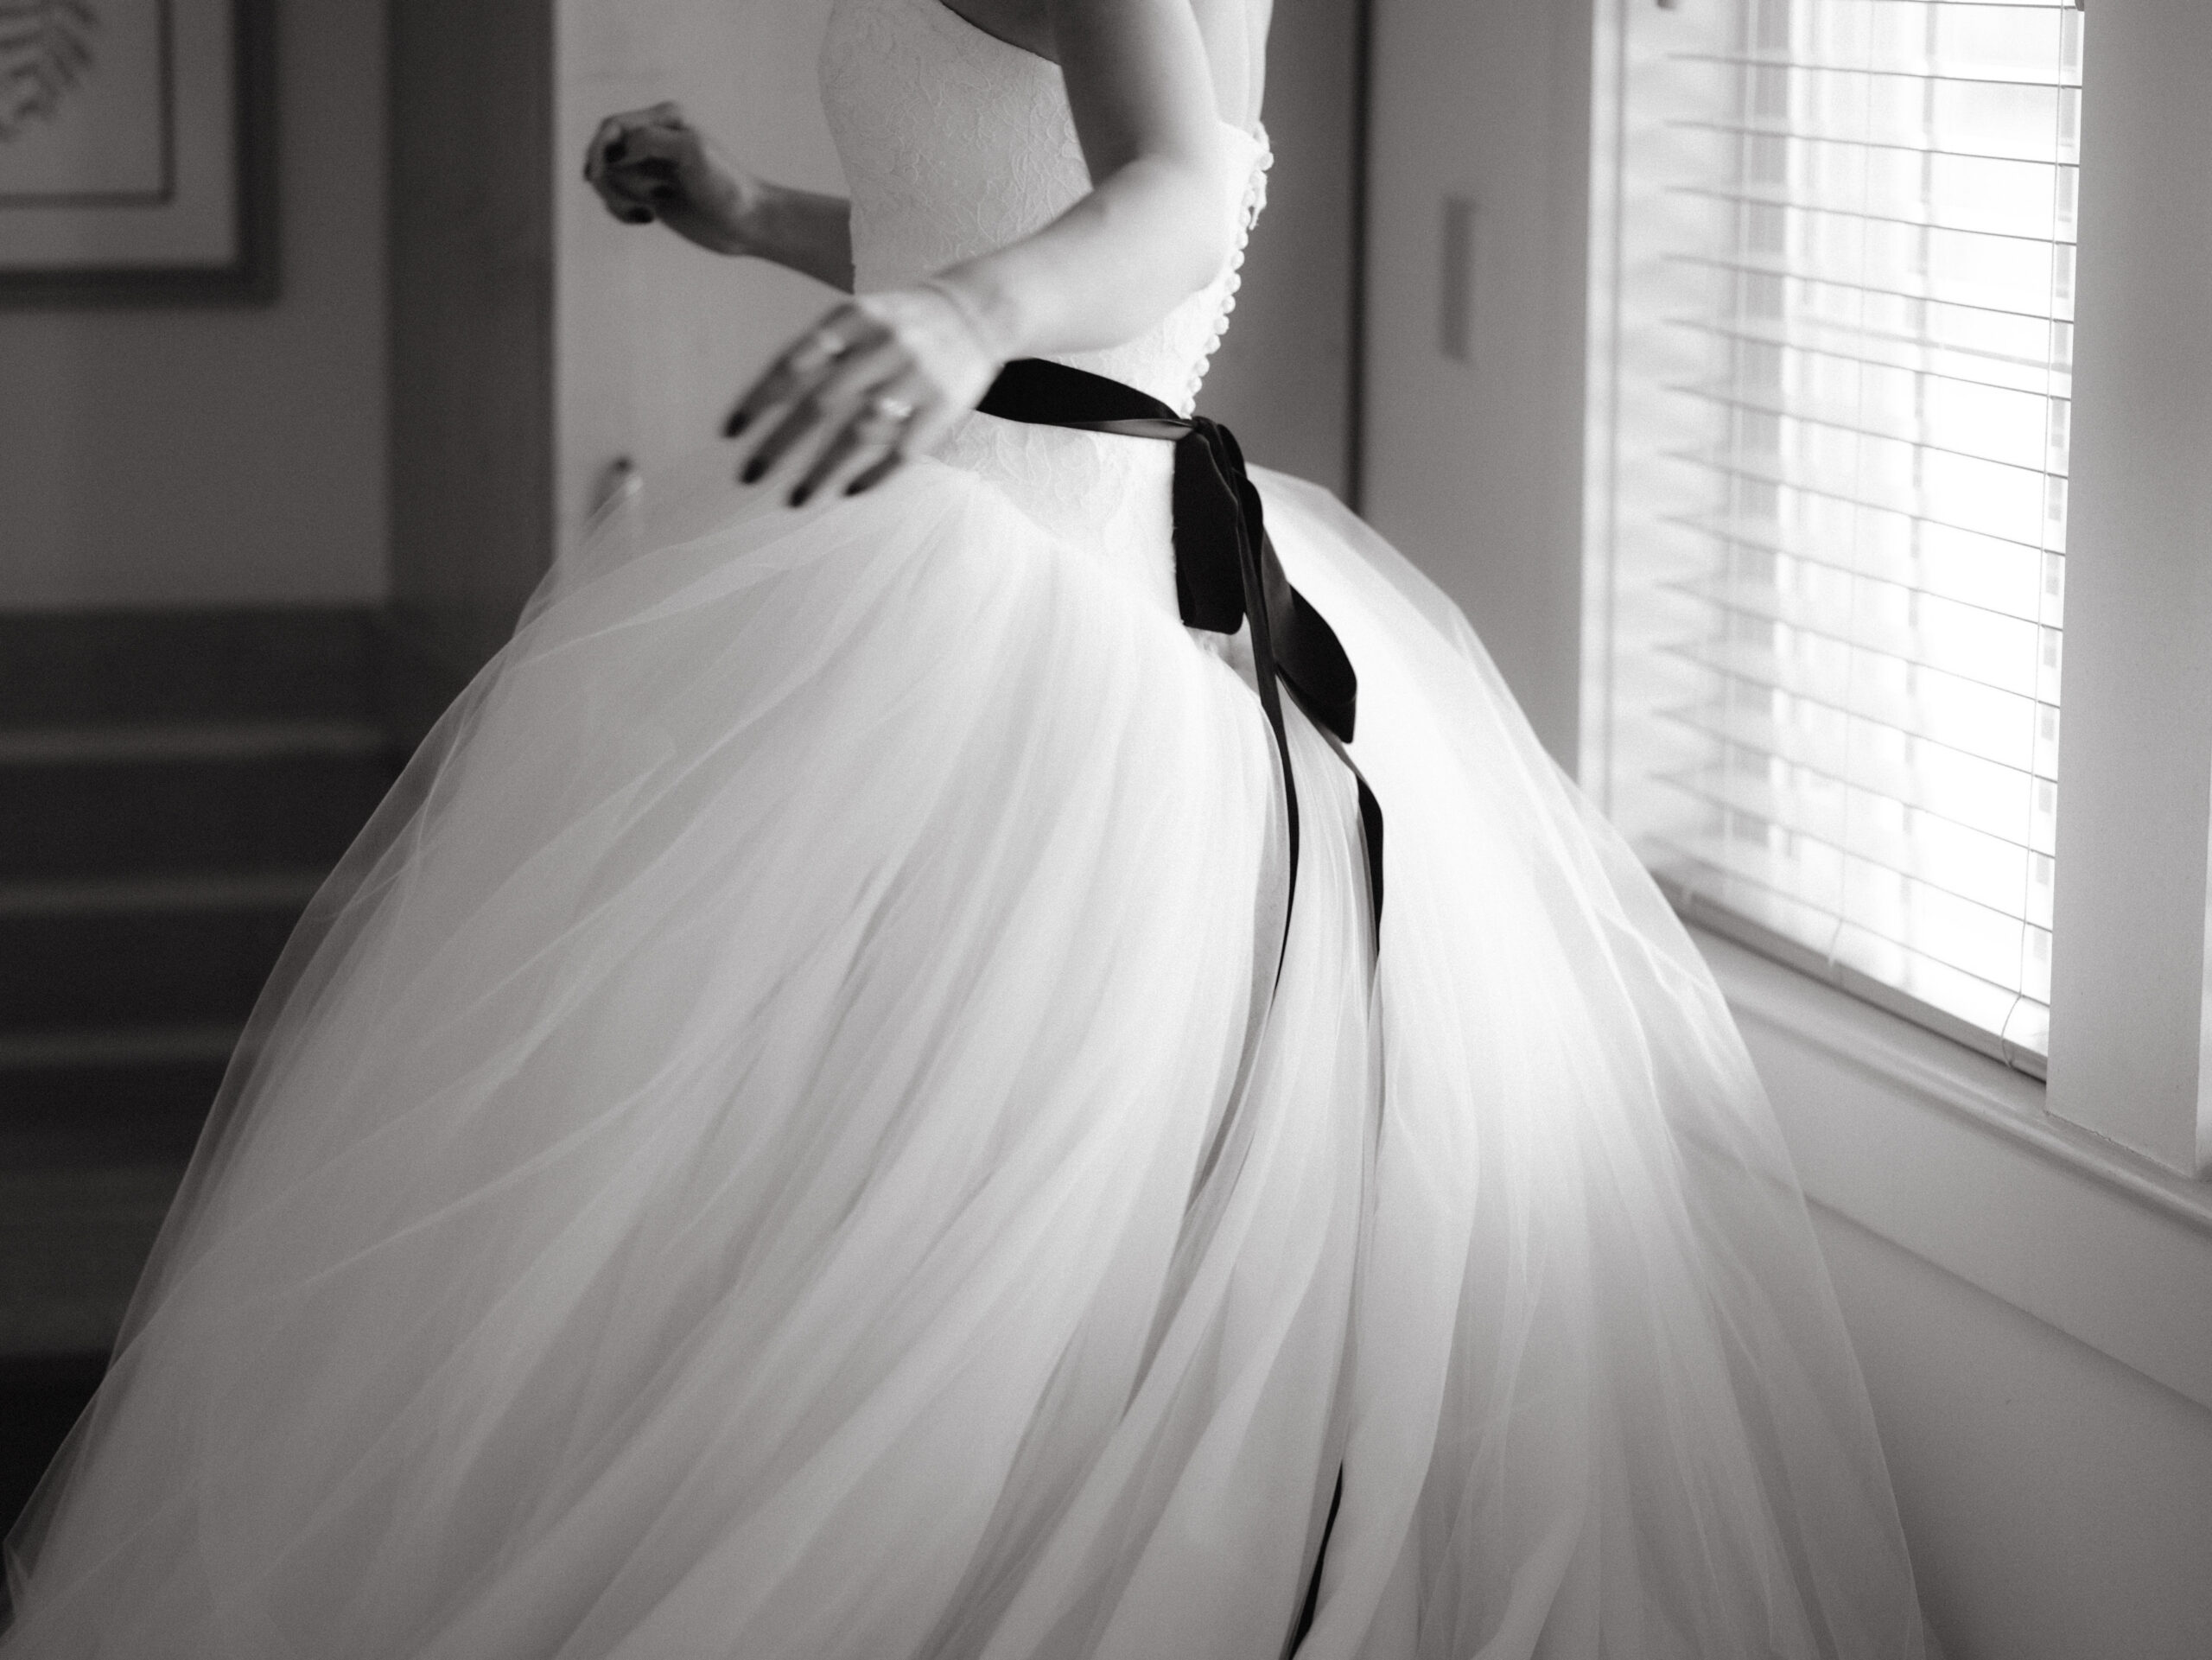 Black and white image of the wedding dress worn by the bride. Wedding Personal style image by Jenny Fu Studio